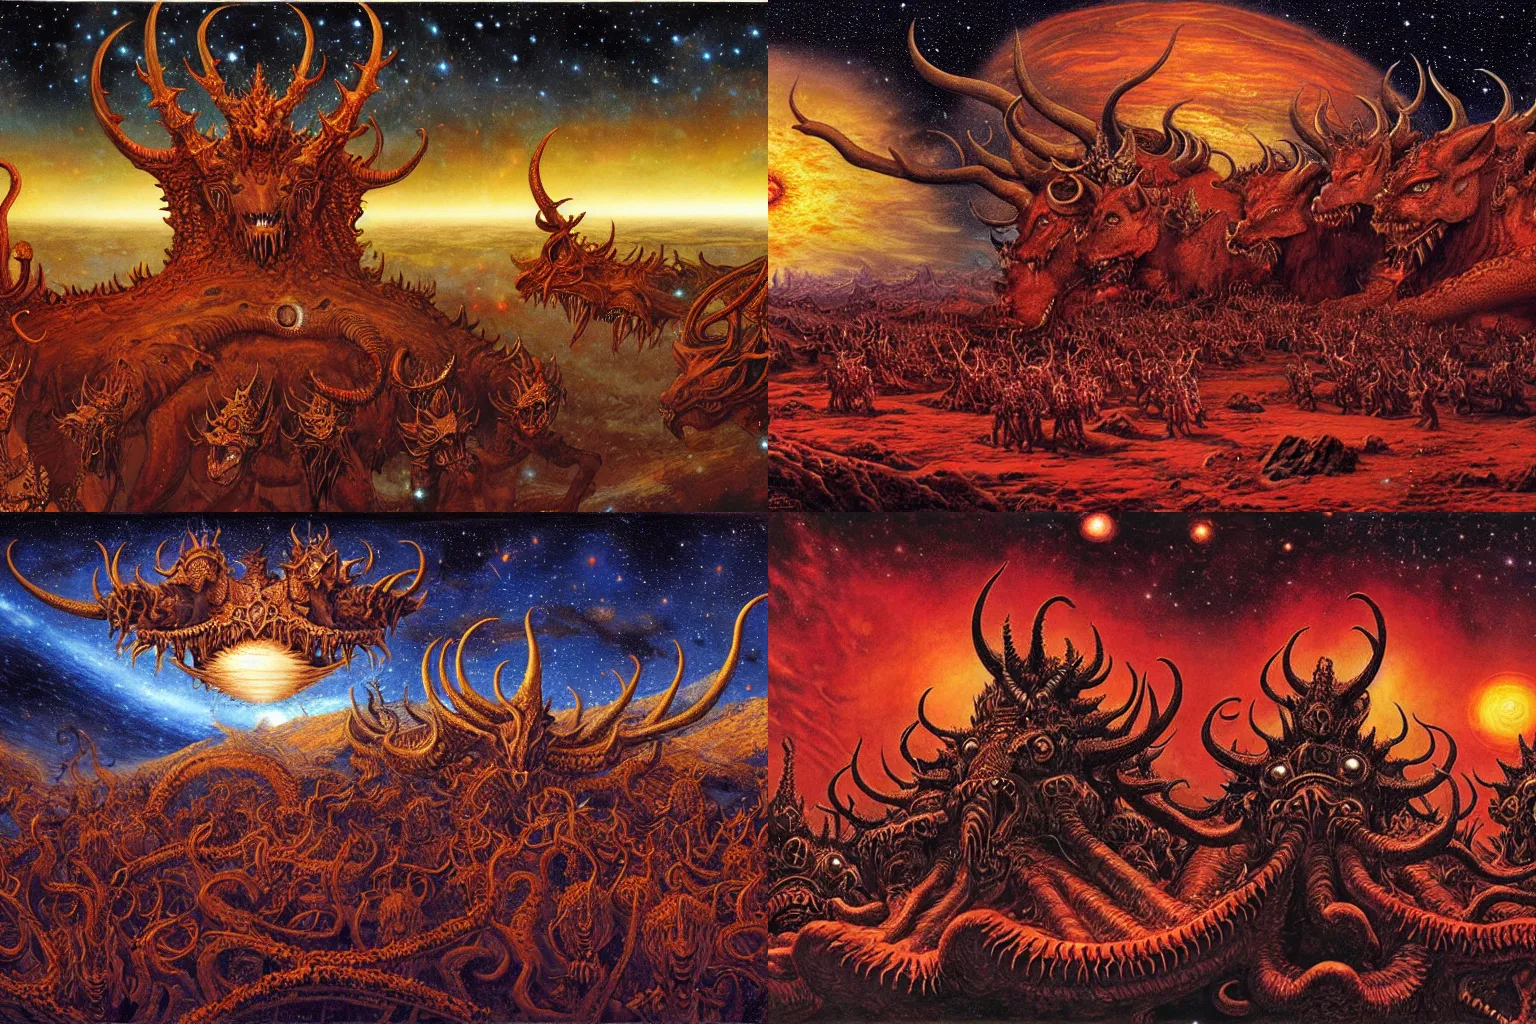 Prompt: diadems, crowns, on a ten horned beast with seven heads, fiery red, detailed, intricate, matte painting by Les Edwards, Jim Burns and Michael Whelan, in background starry night sky and distant earth, milky way